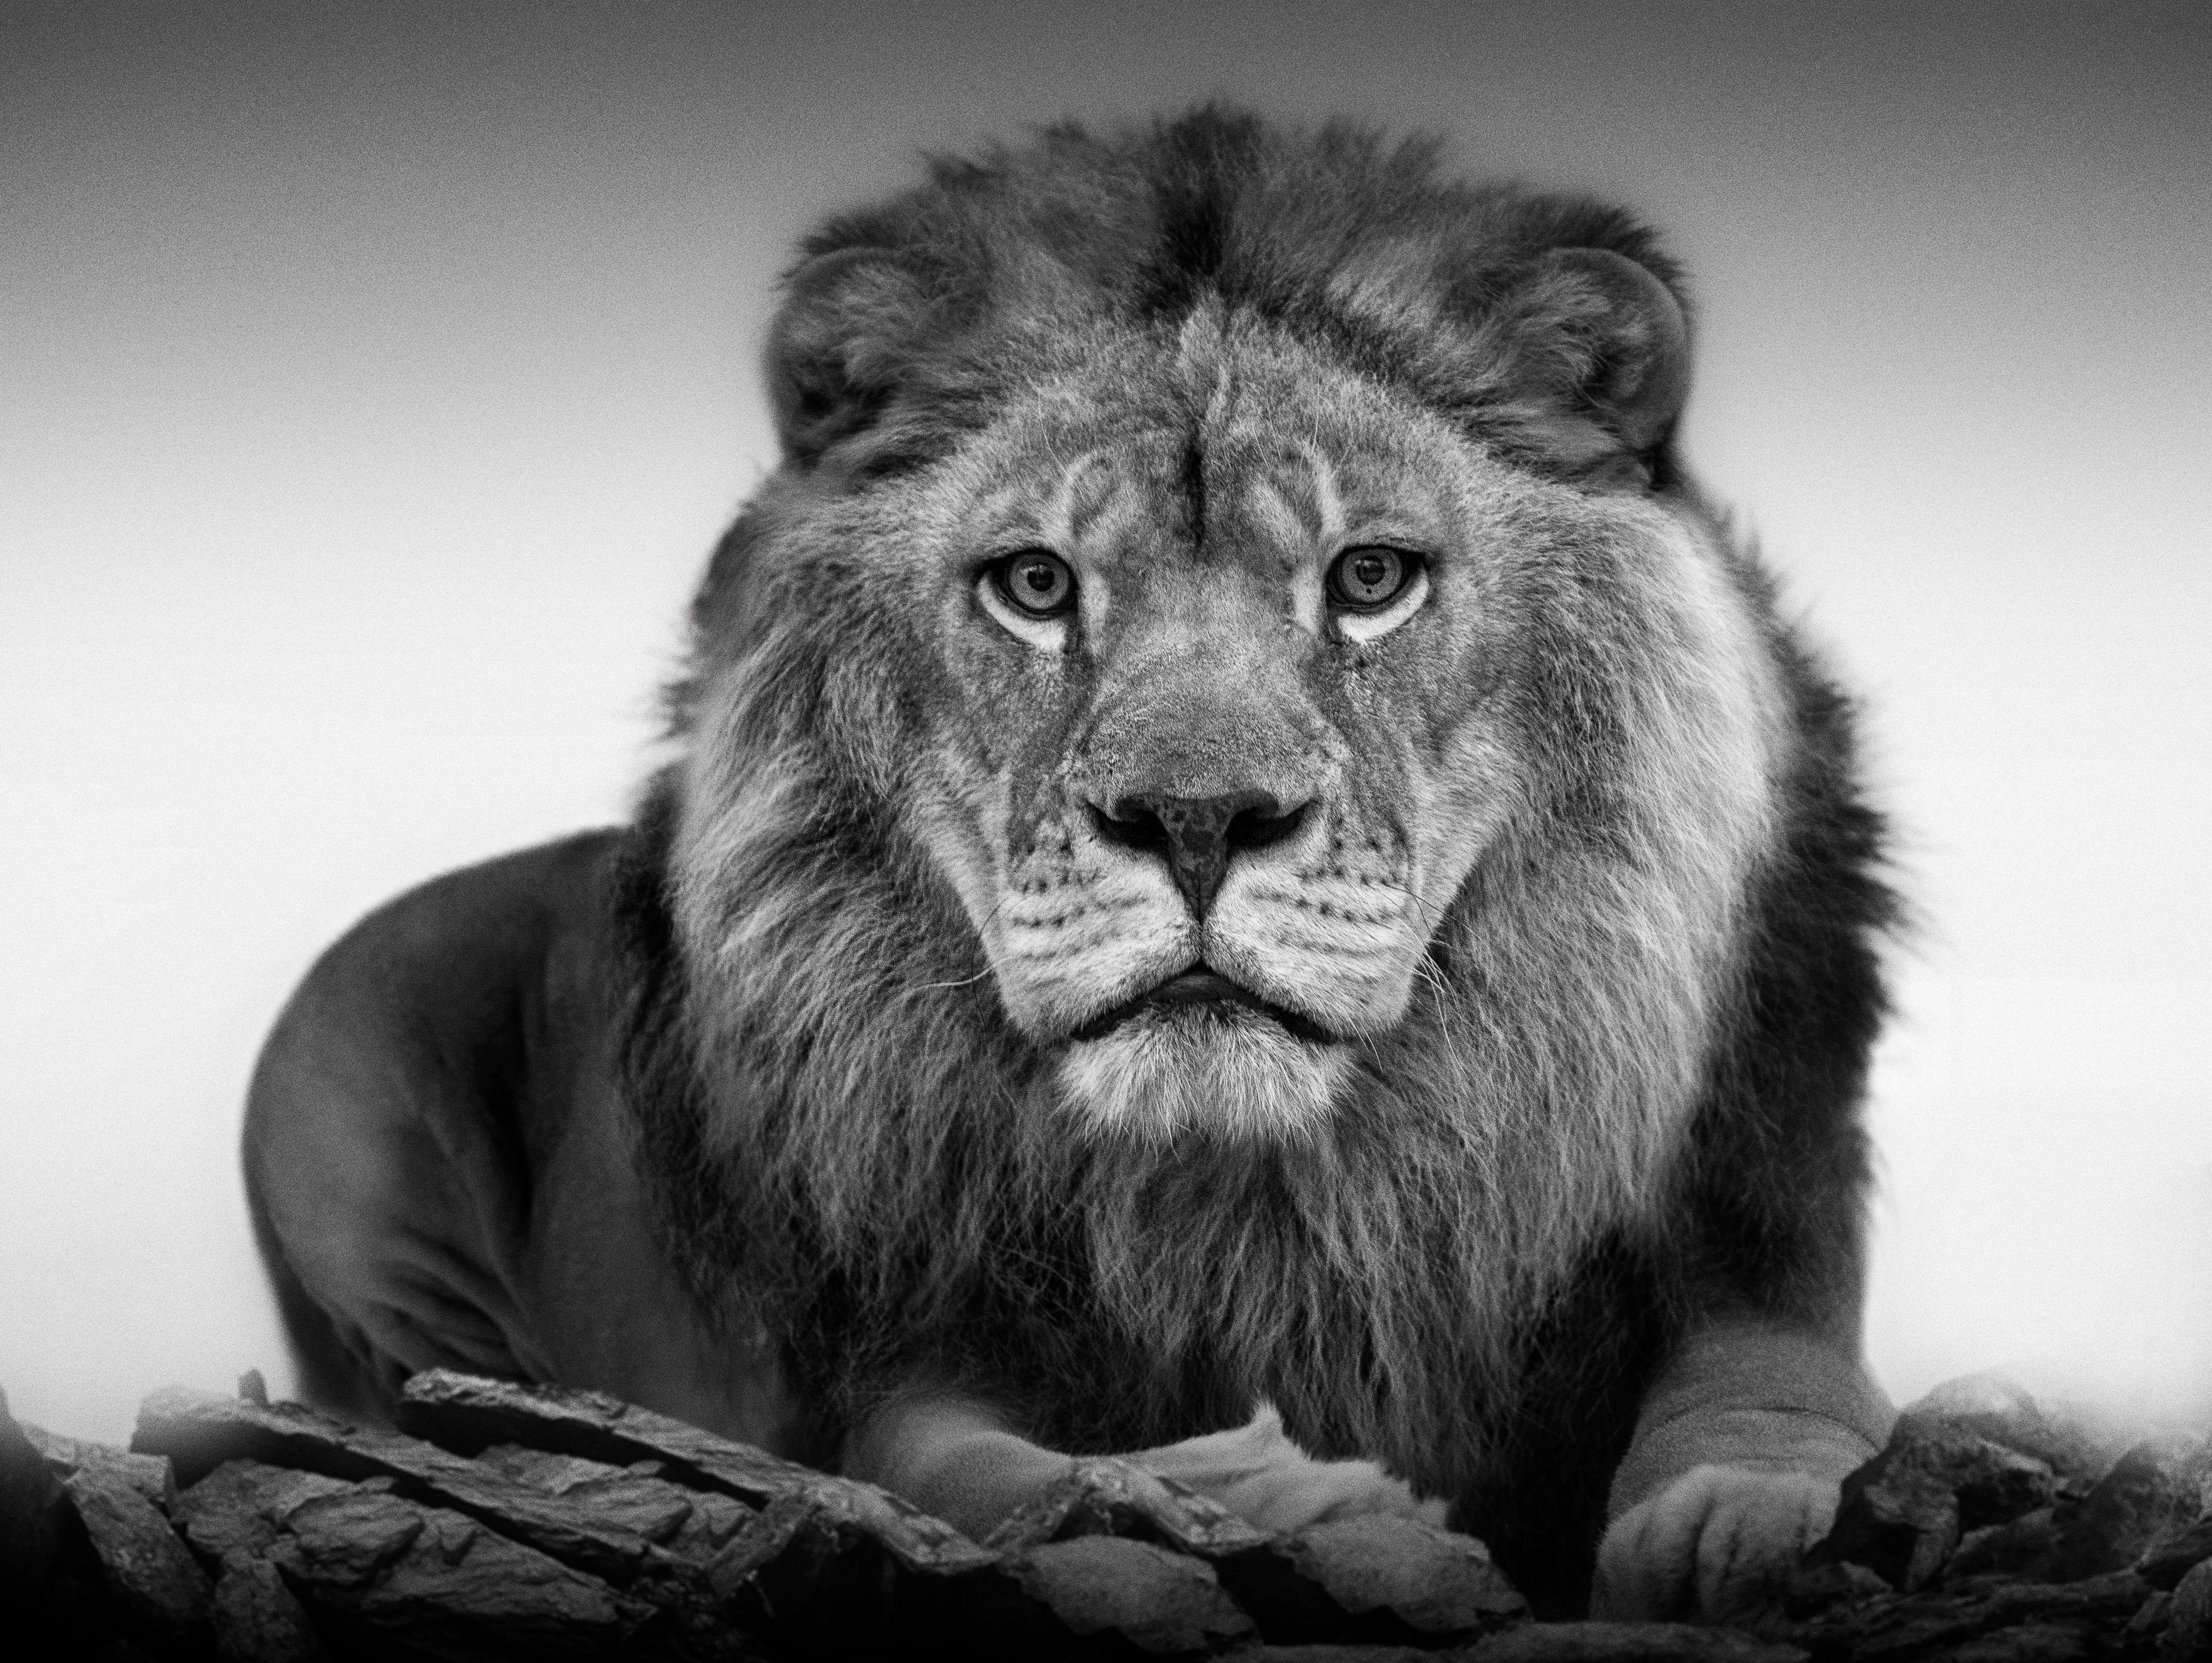 Shane Russeck Black and White Photograph - 28x40 "Lion Portrait",  Black and White Lion Photography , Photograph Signed Art